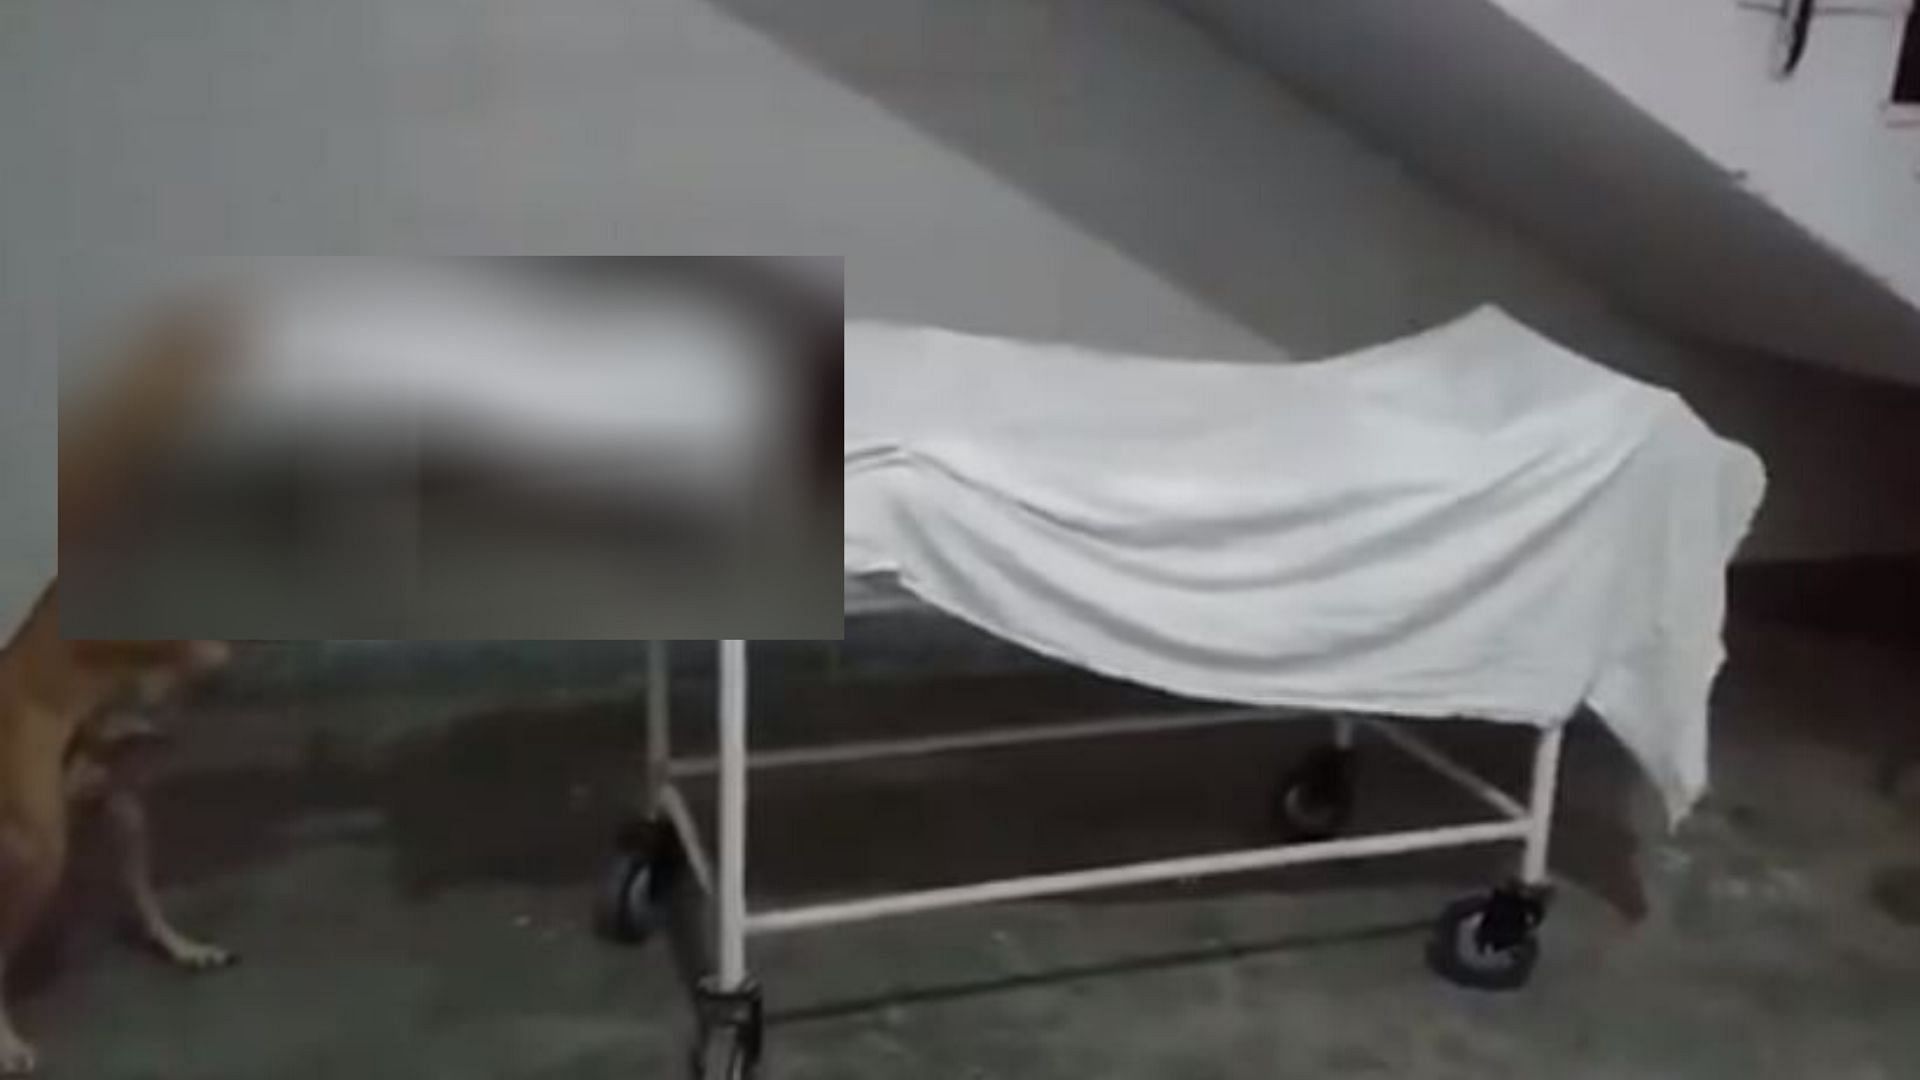 Dog nibbling on a dead body of girl in UP hospital